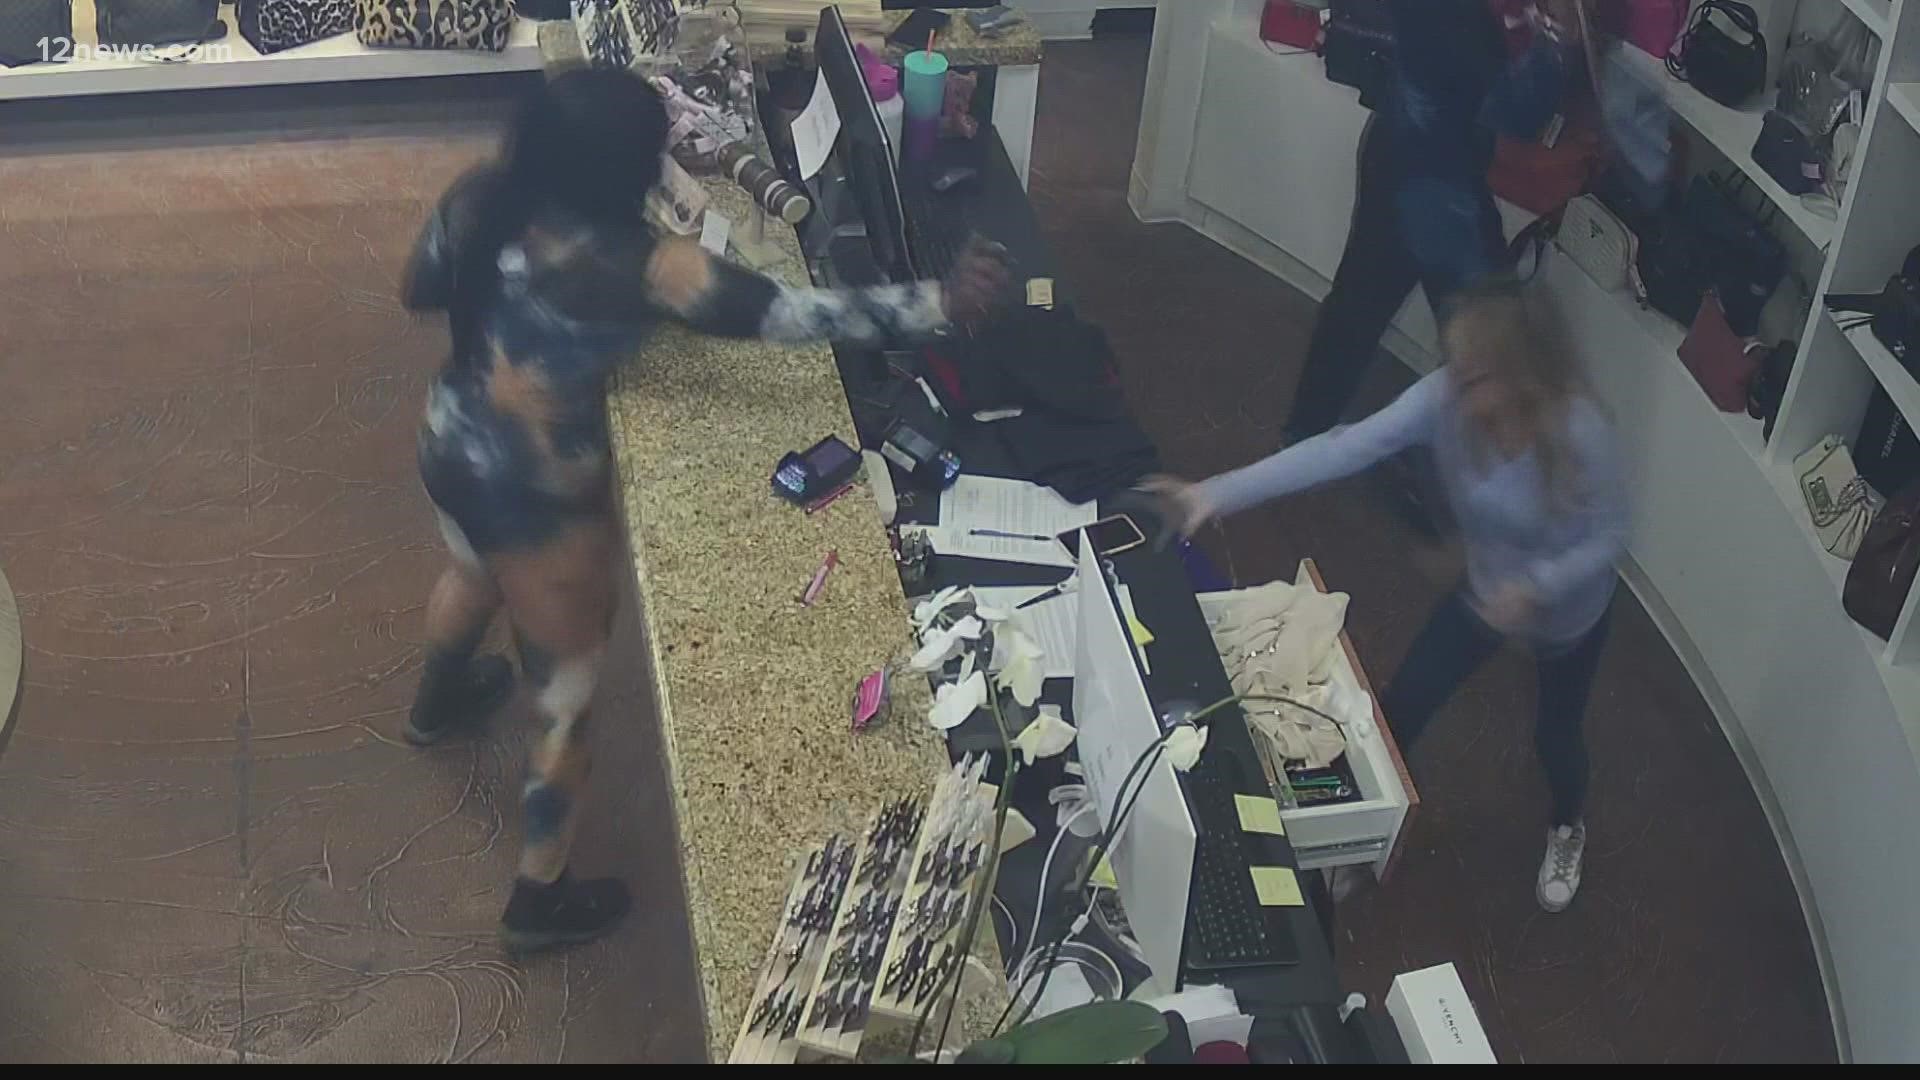 Two shoppers became suspects when they walked into Urban Exchange in Scottsdale and targeted a wall of designer purses behind the counter.